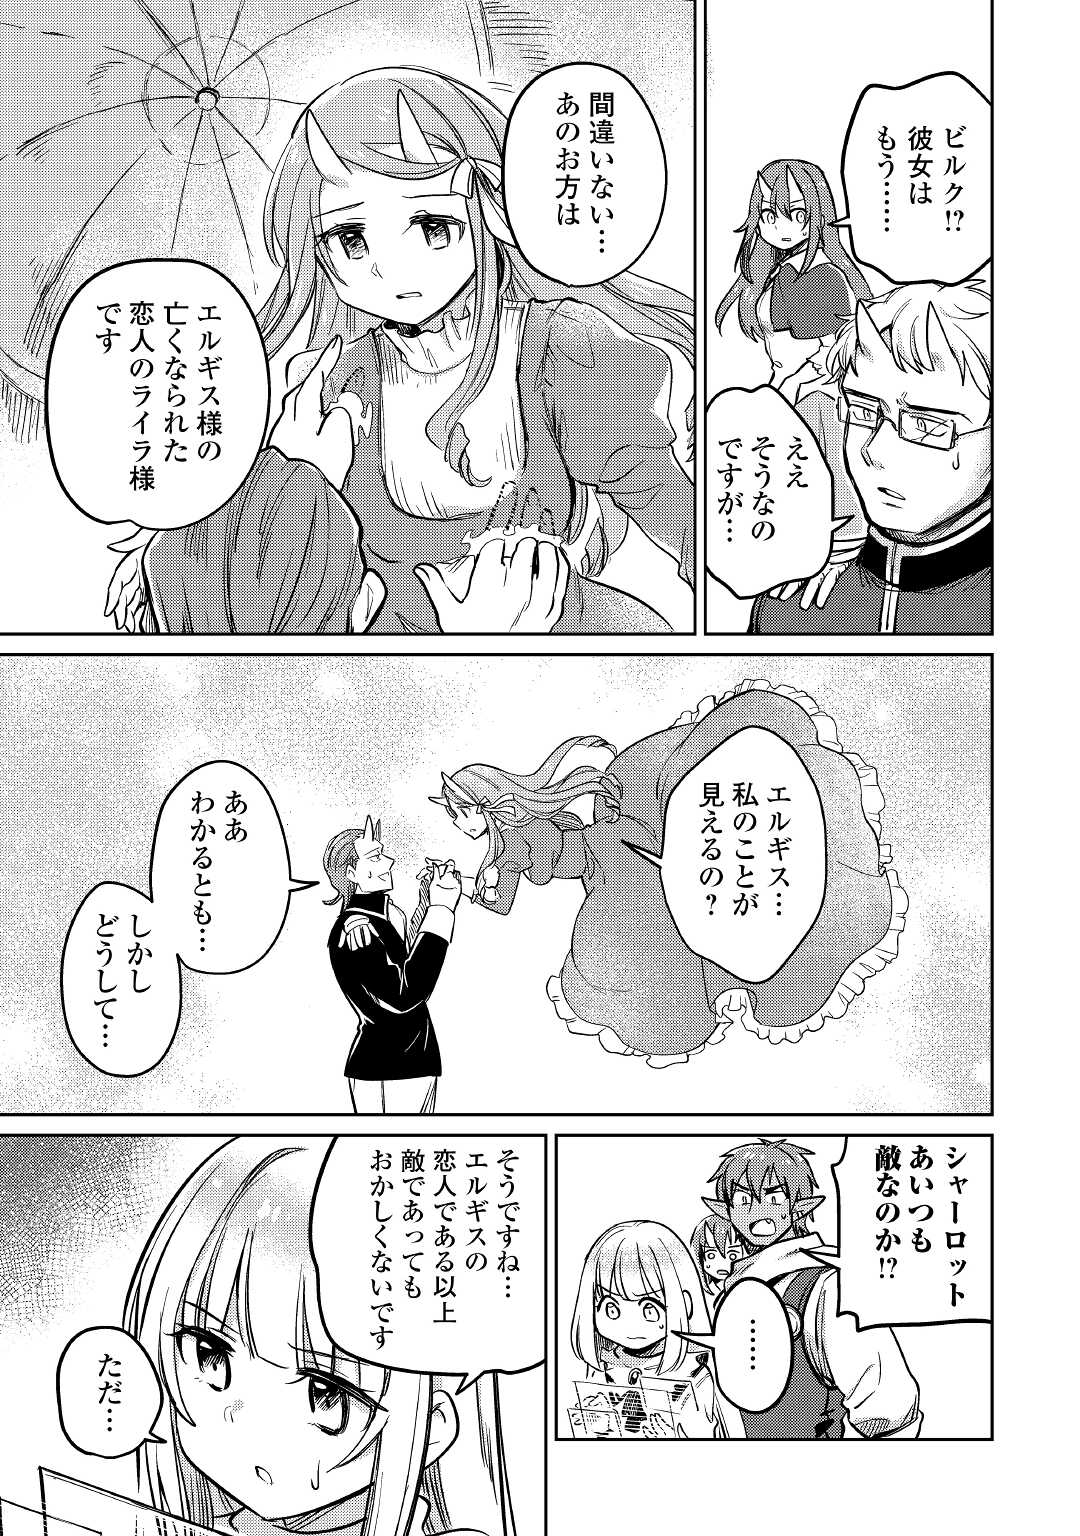 The Former Structural Researcher’s Story of Otherworldly Adventure 第40話 - Page 7